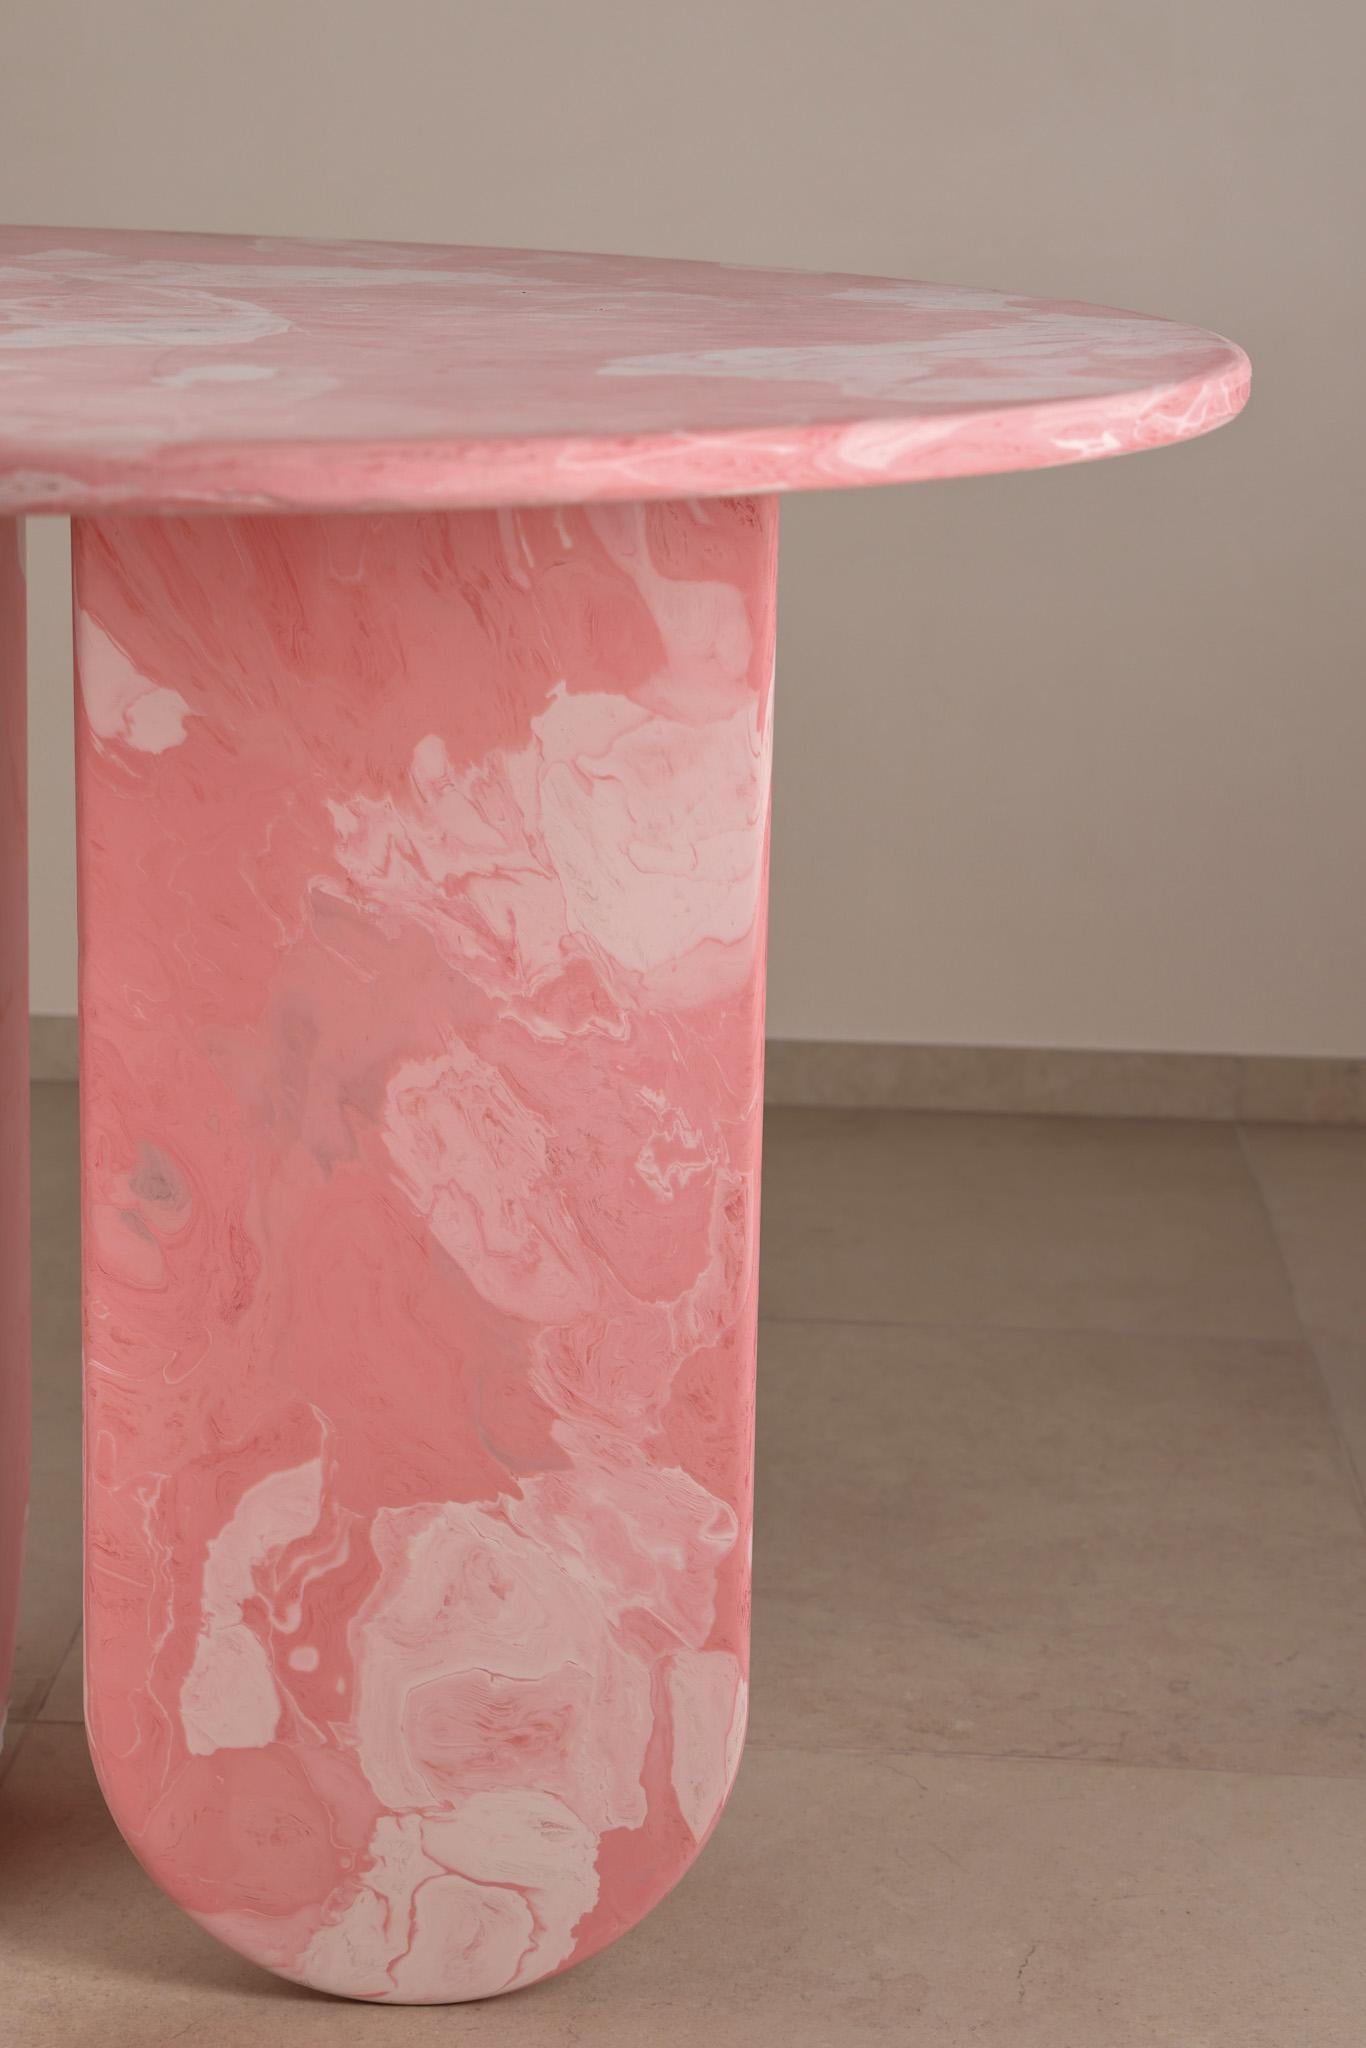 Dutch Contemporary Pink Round Table Hand-Crafted 100% Recycled Plastic by Anqa Studios